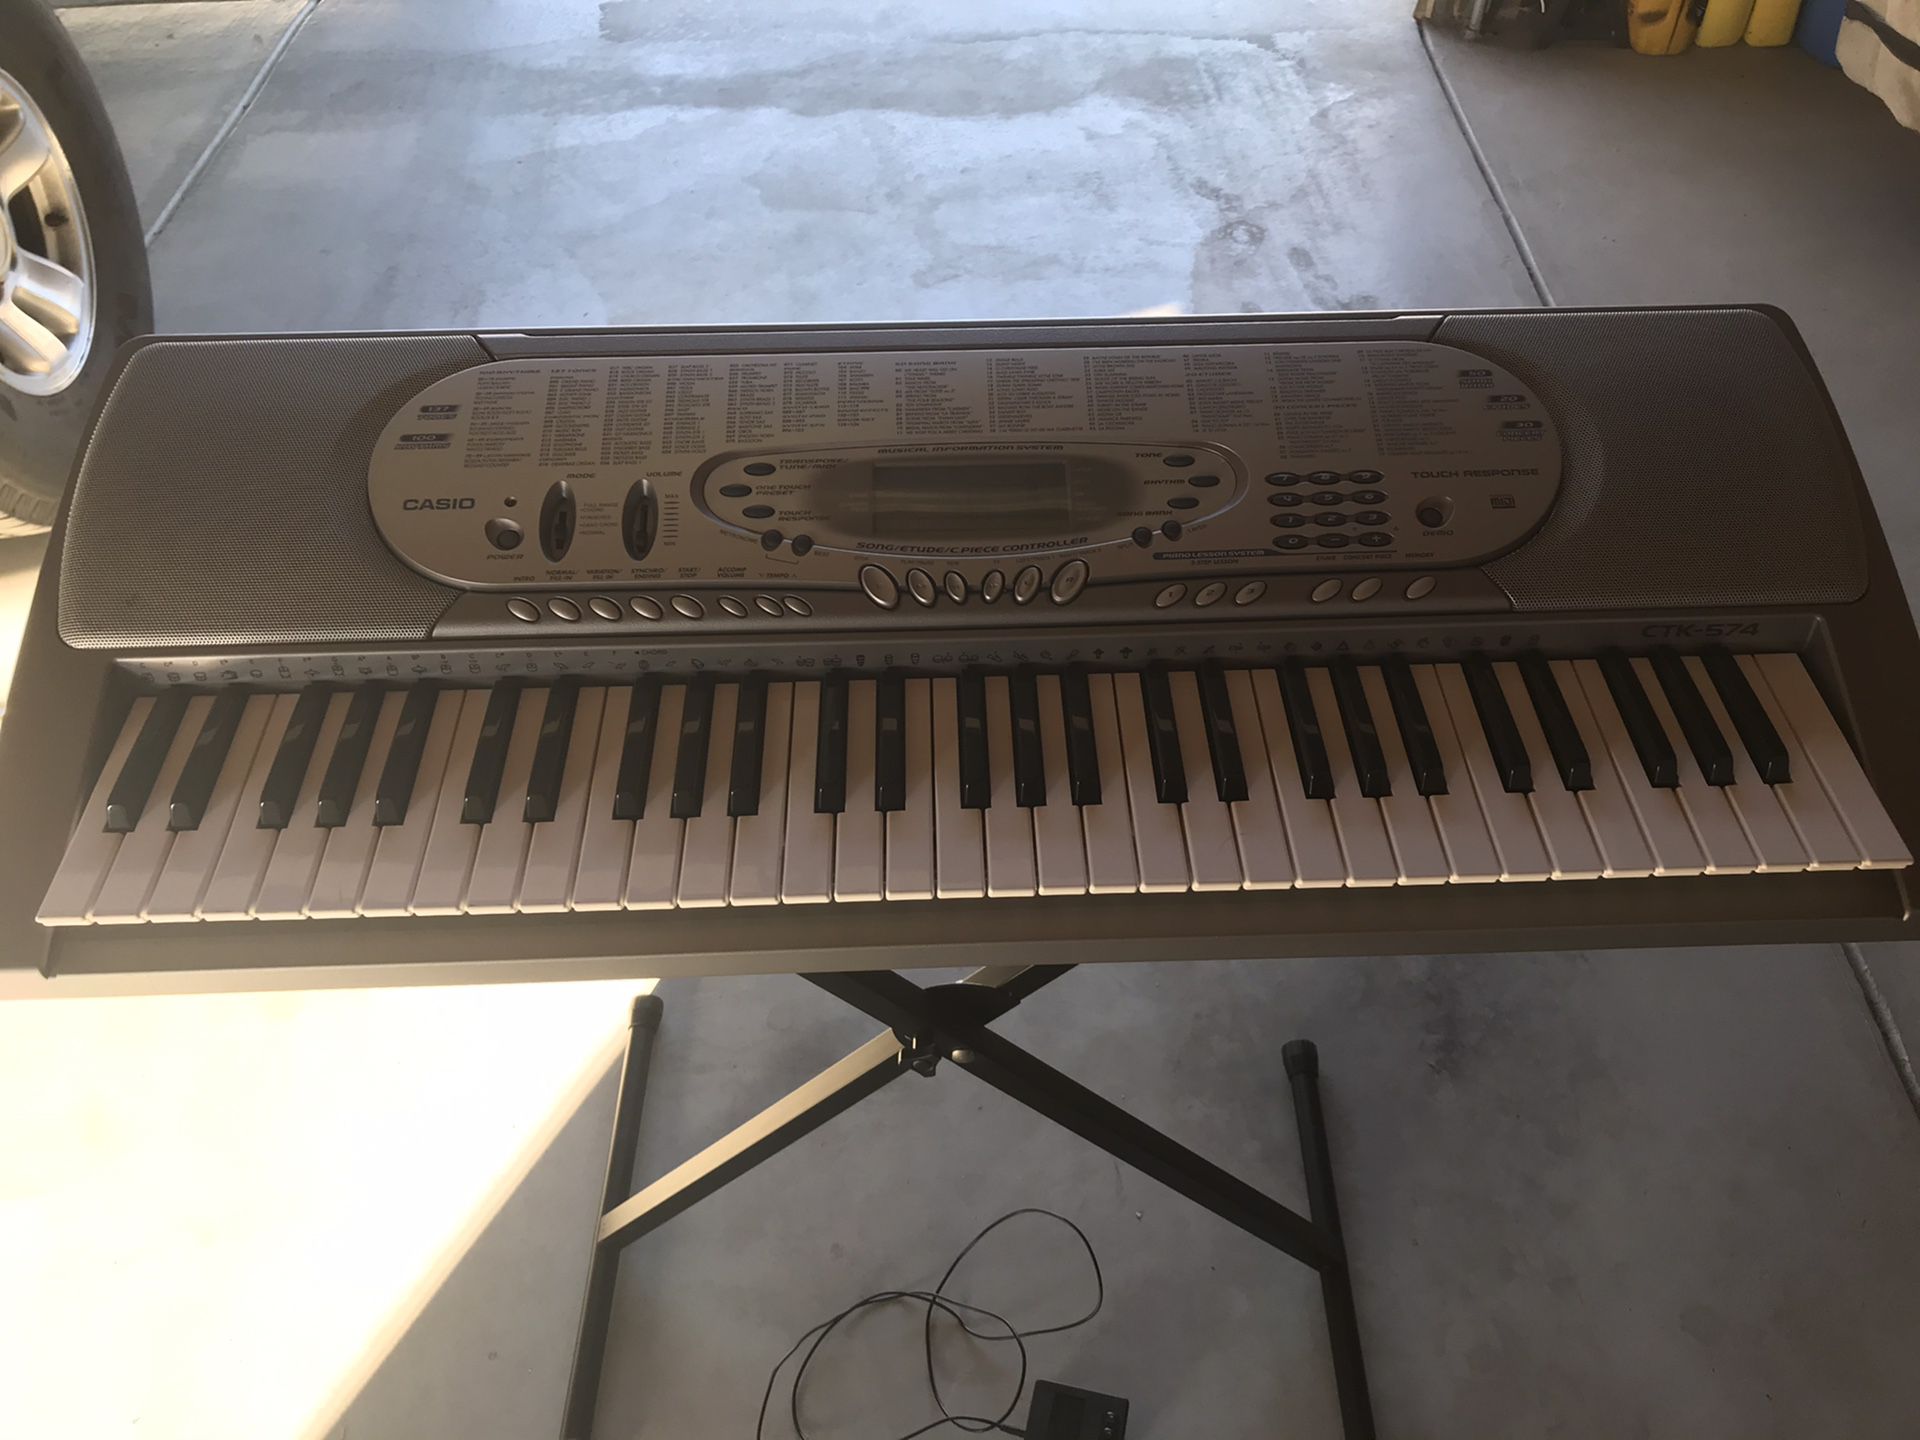 Casio piano with lots of features